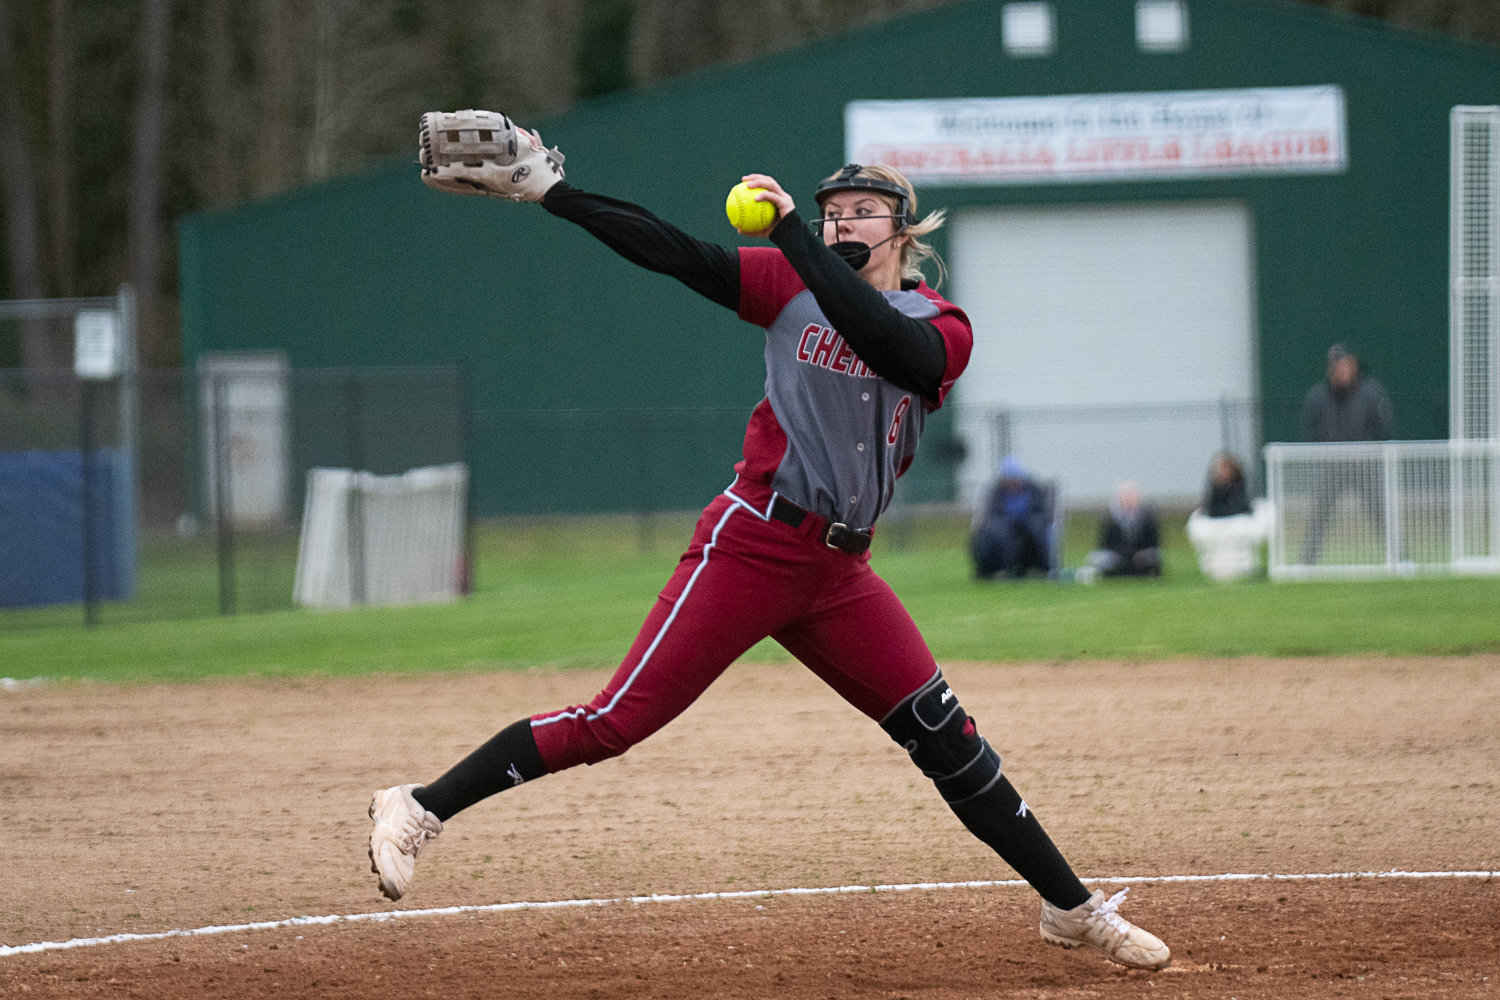 Staysha Fluetsch delivers a pitch during W.F. West's 5-3 loss to Centralia on March 28.